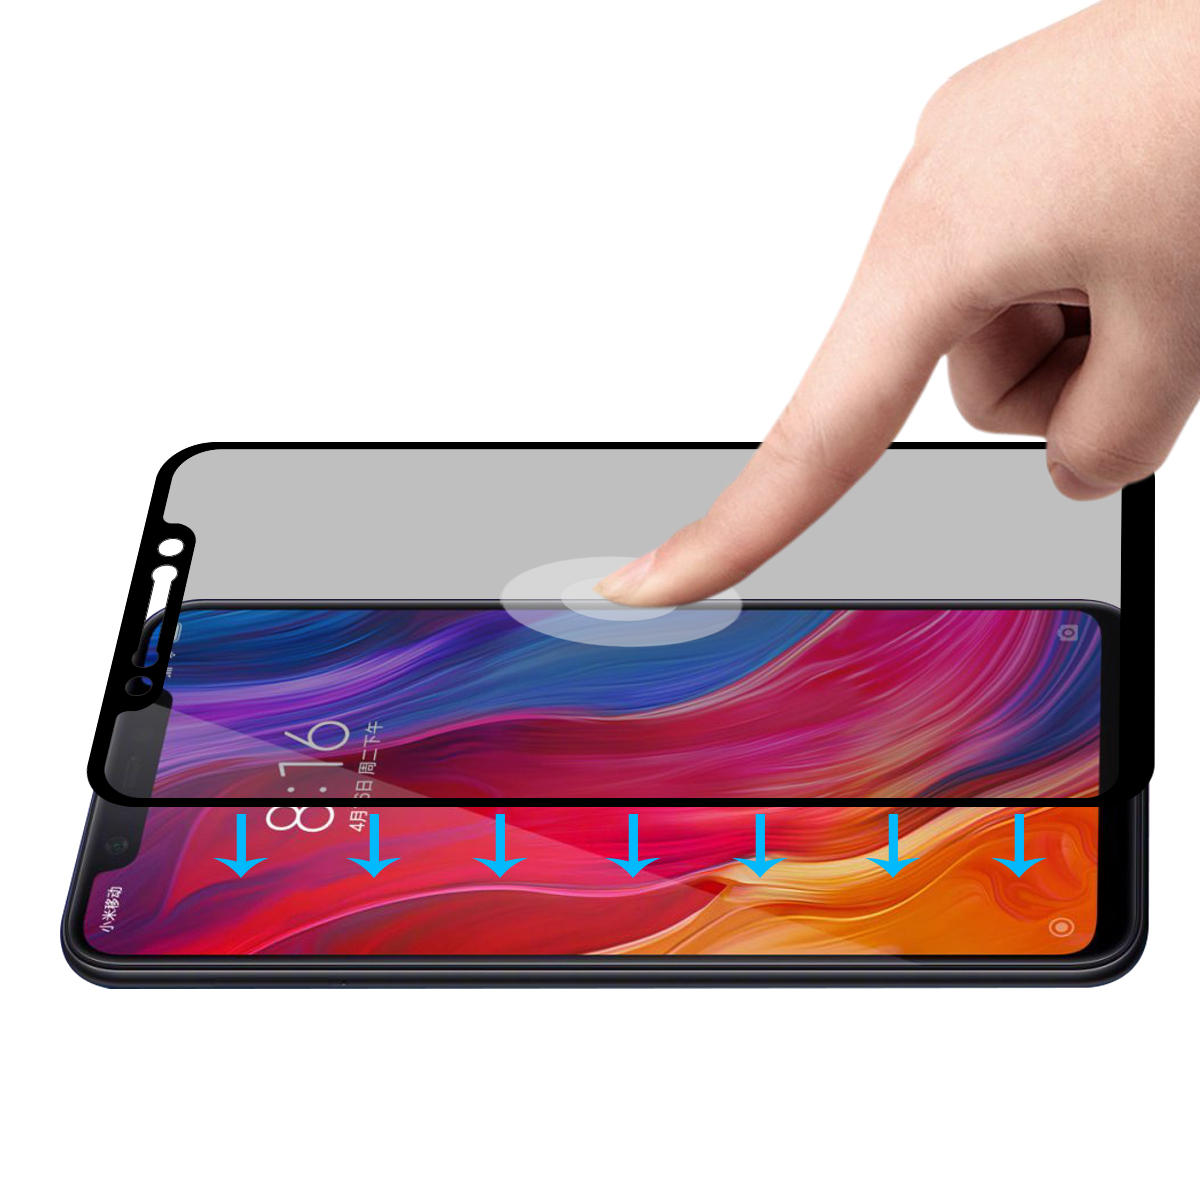 Enkay 9H 2.5D Full Coverage Anti-peeping Anti-explosion Tempered Glass Screen Protector for Xiaomi Mi8 / Xiaomi Mi 8 Pro / Xiaomi Mi 8 Explorer Edition Non-original